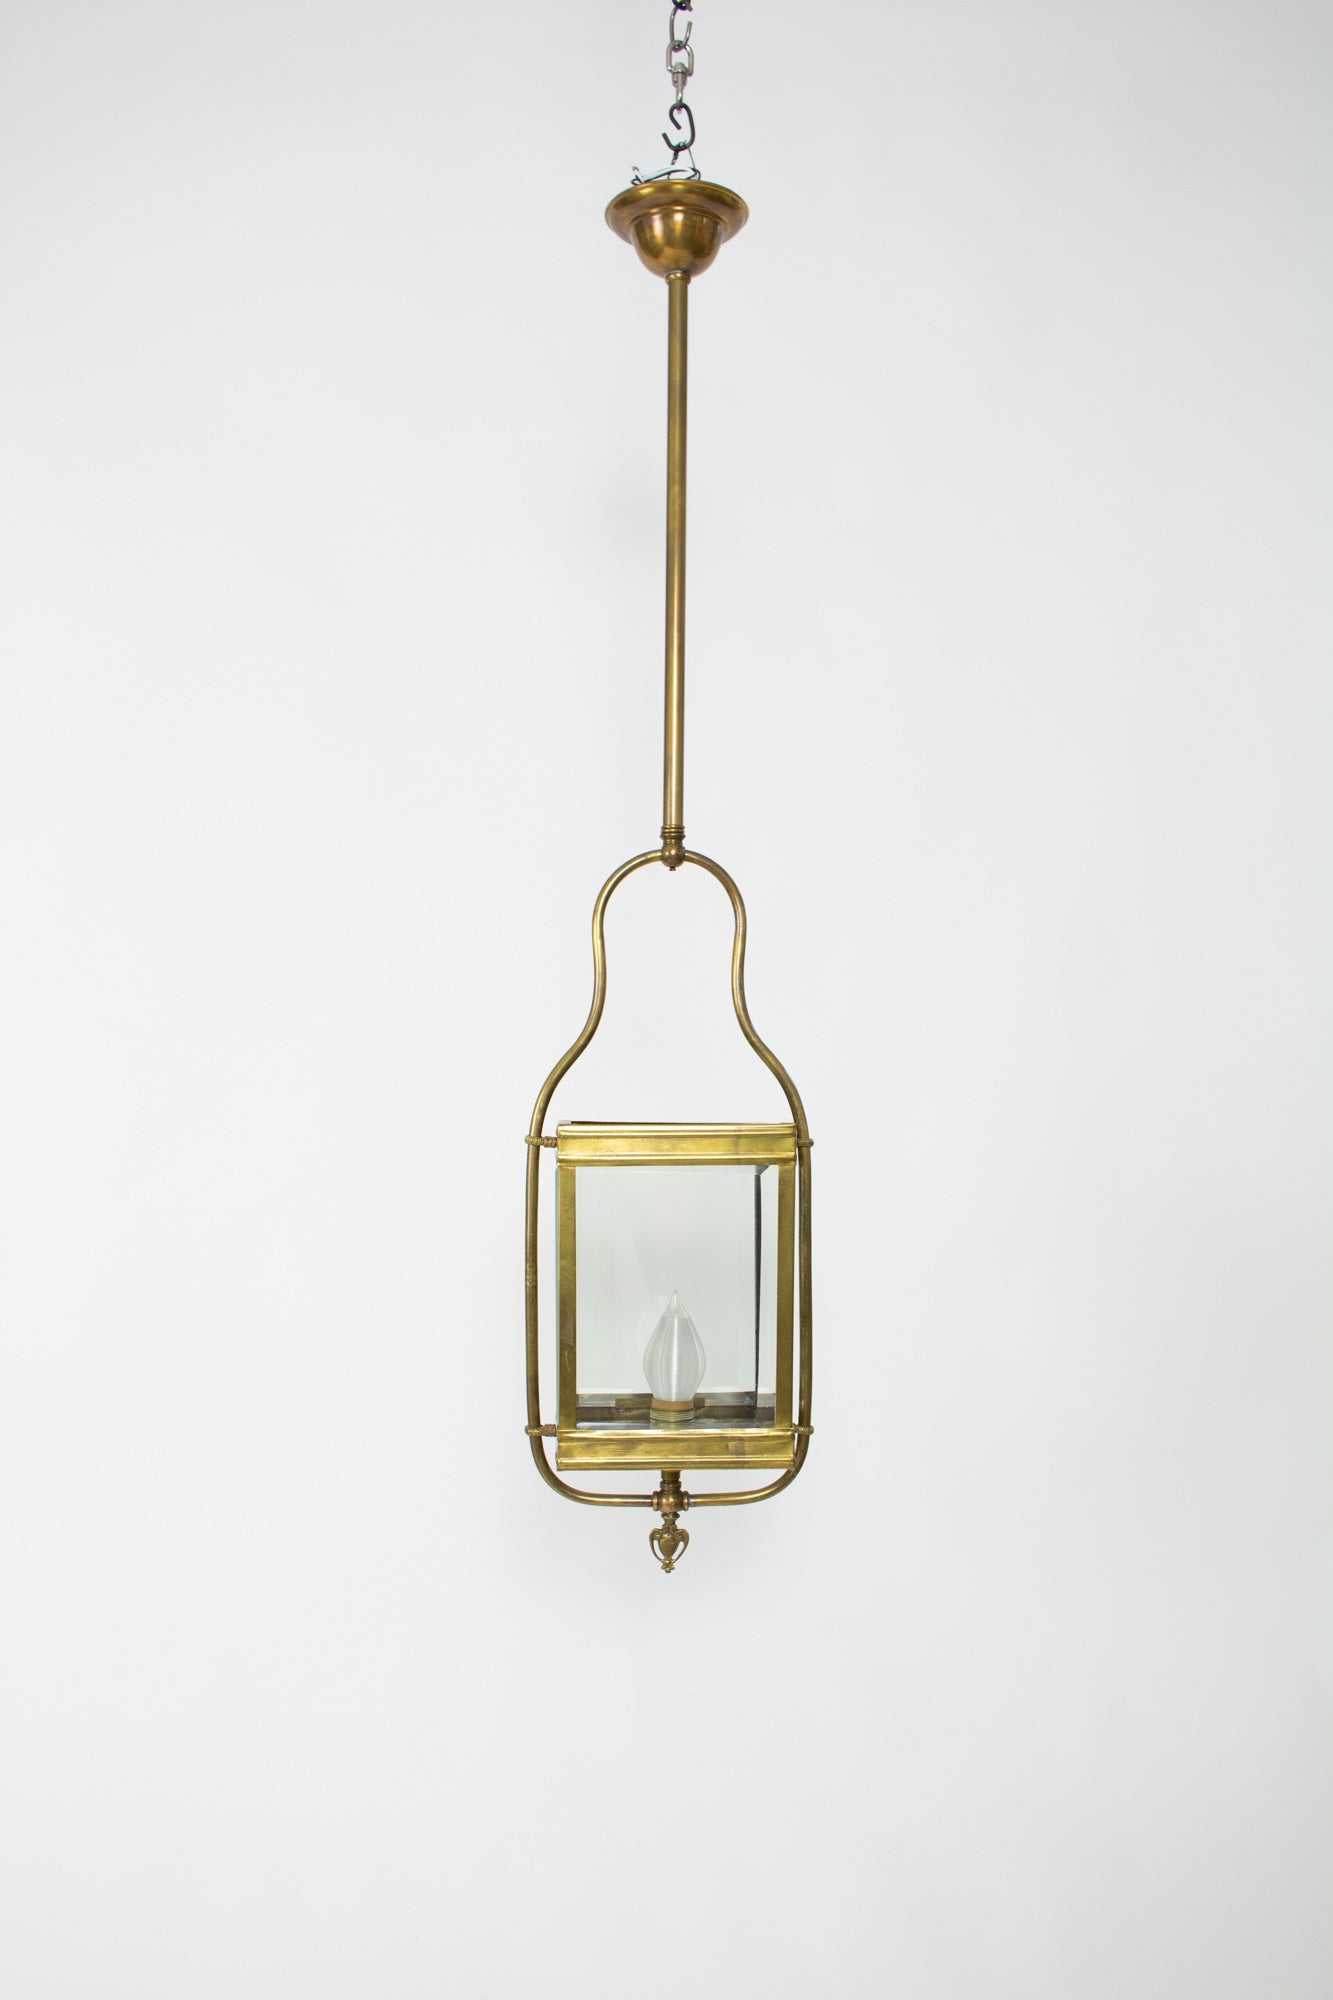 Originally gas, this lantern has it’s original beveled glass panels. Made of brass. The overall length is currently 41?. C. 1890

Dimensions: 
Height: 41
Width (Diameter): 9.